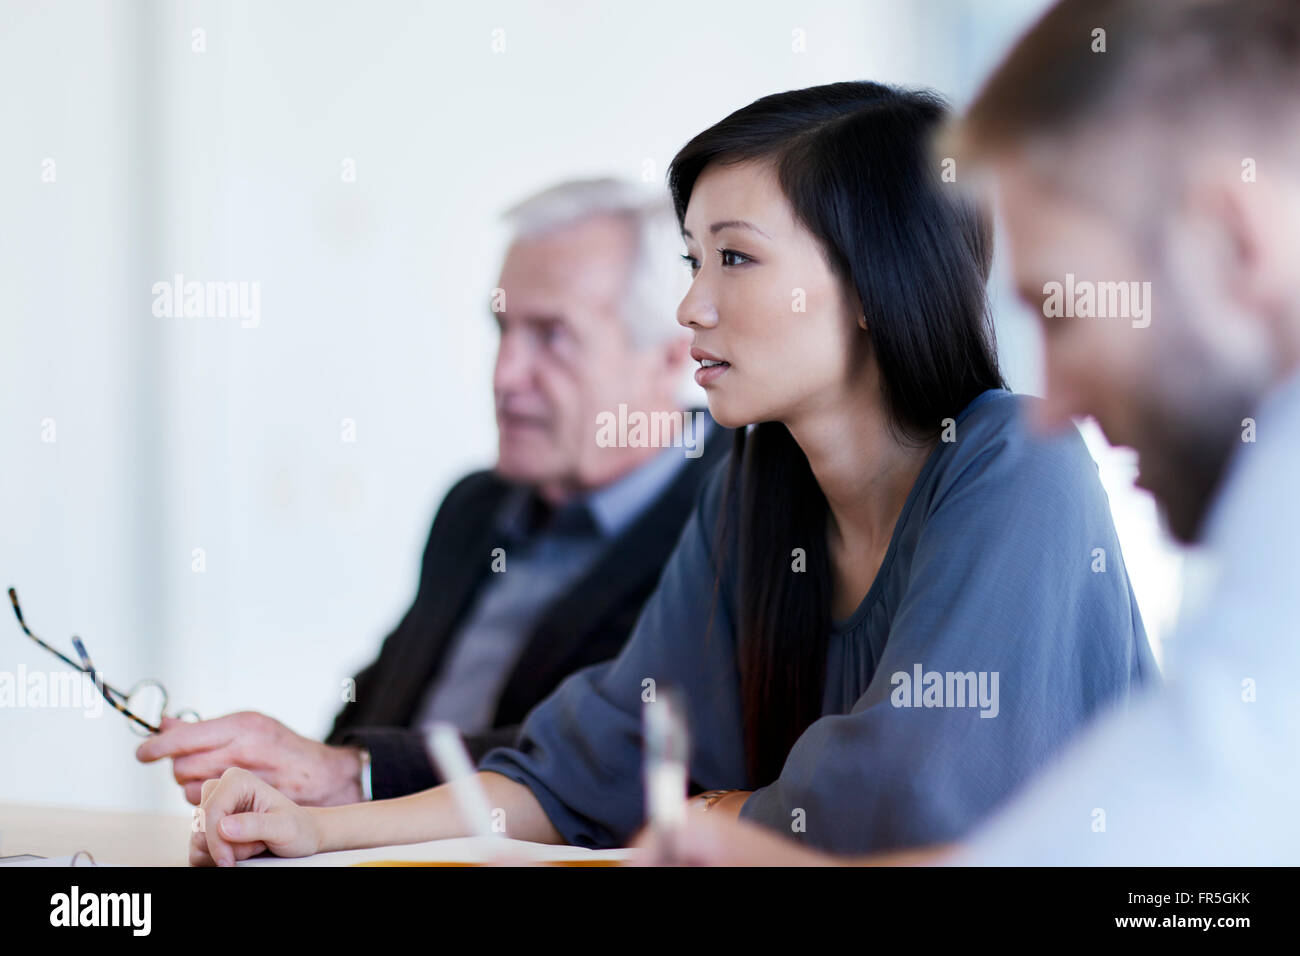 Businesswoman listening in meeting Banque D'Images